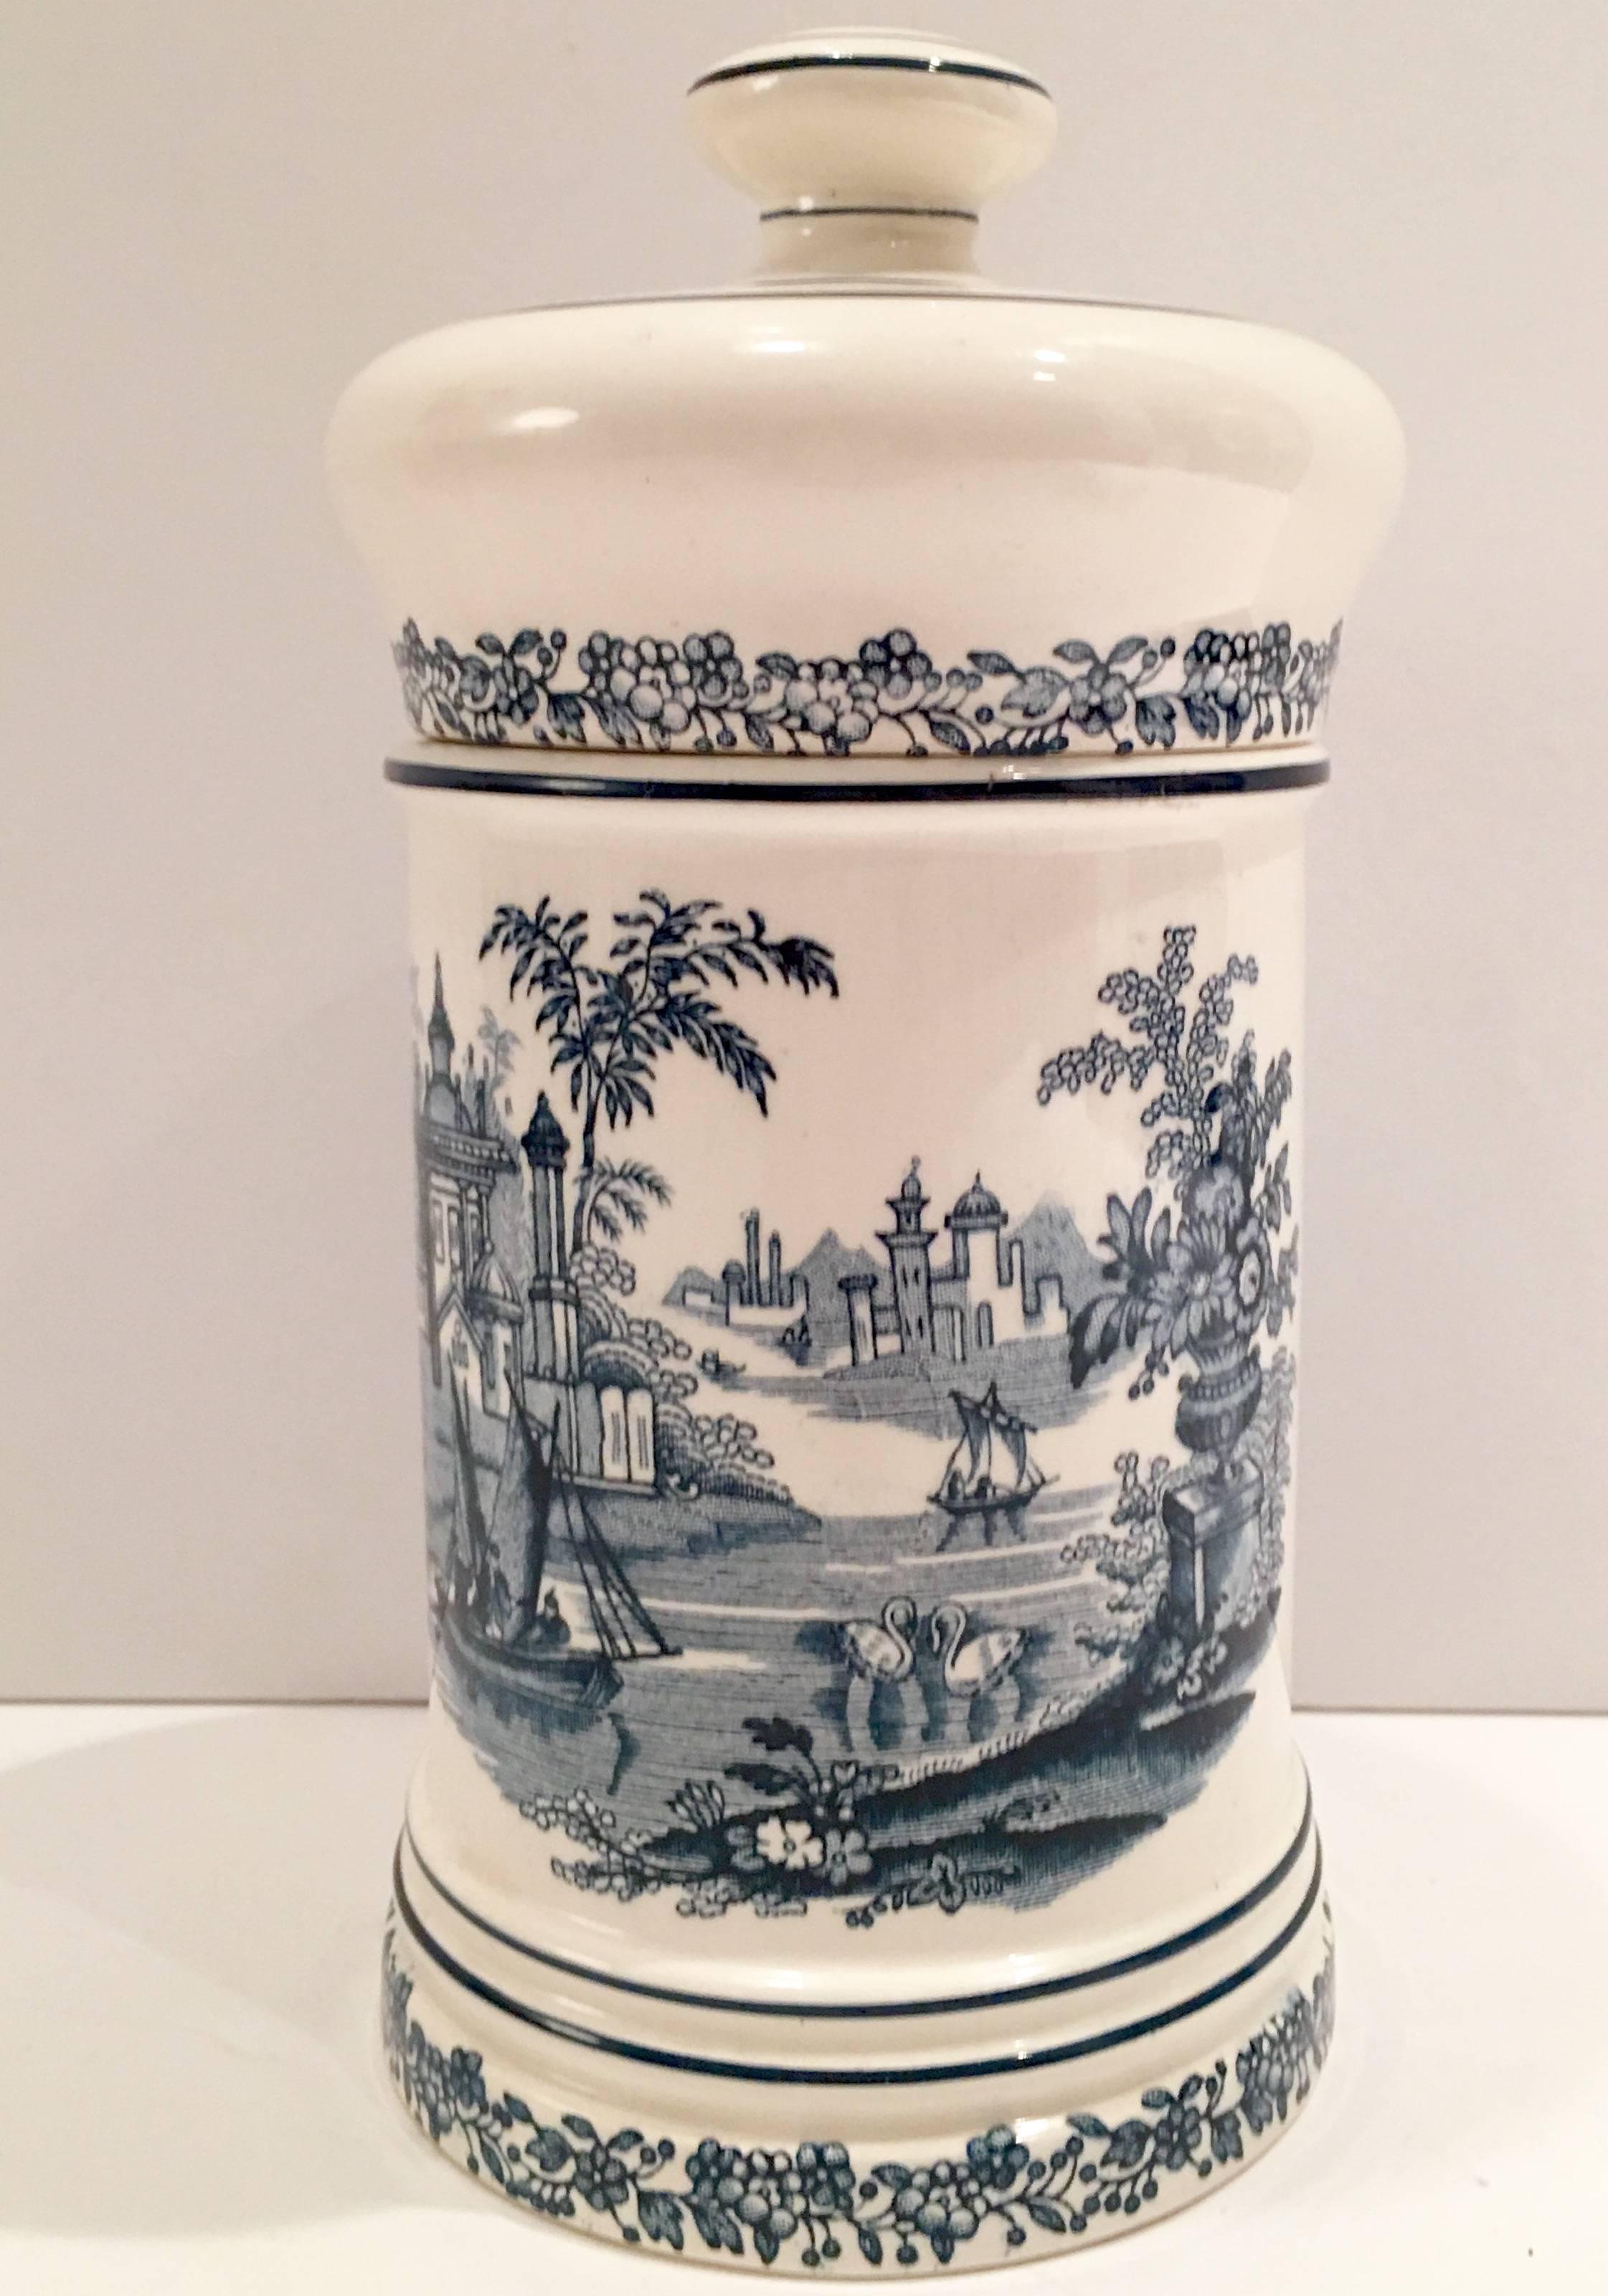 1930'S rare Spanish ceramic" humijar" lidded jar. Features a white ground with blue country estate motif. Signed on the underside, La Cartuja De Sevilla, made in Spain.